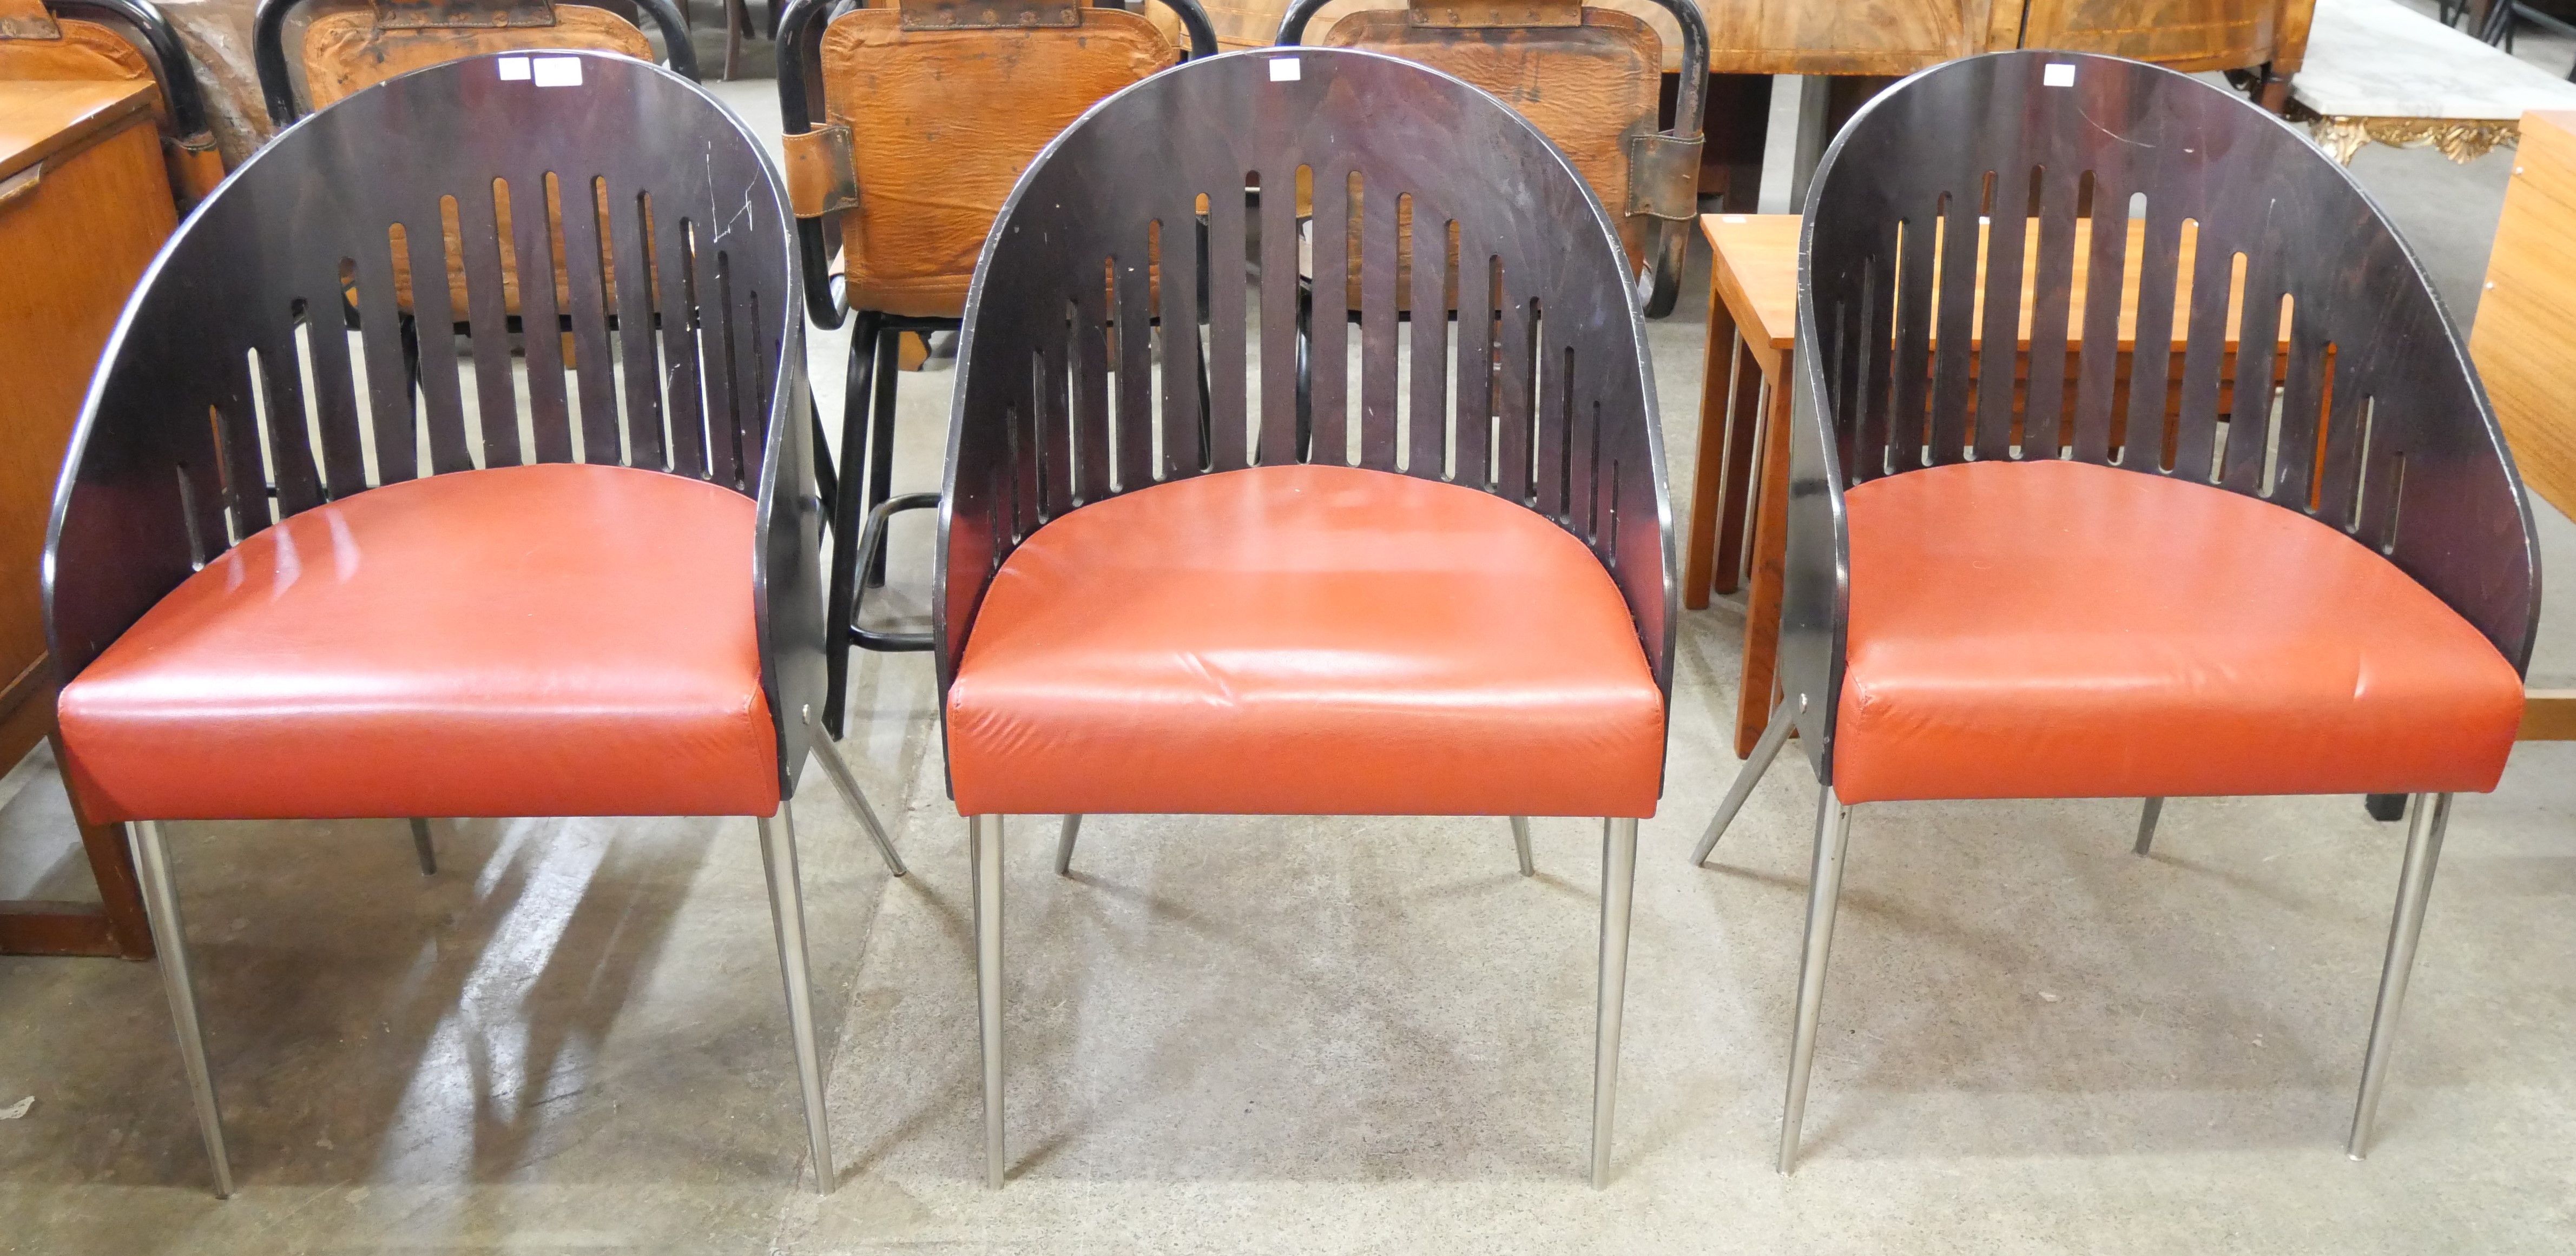 A set of three Phillipe Starck style bent plywood and red vinyl chairs